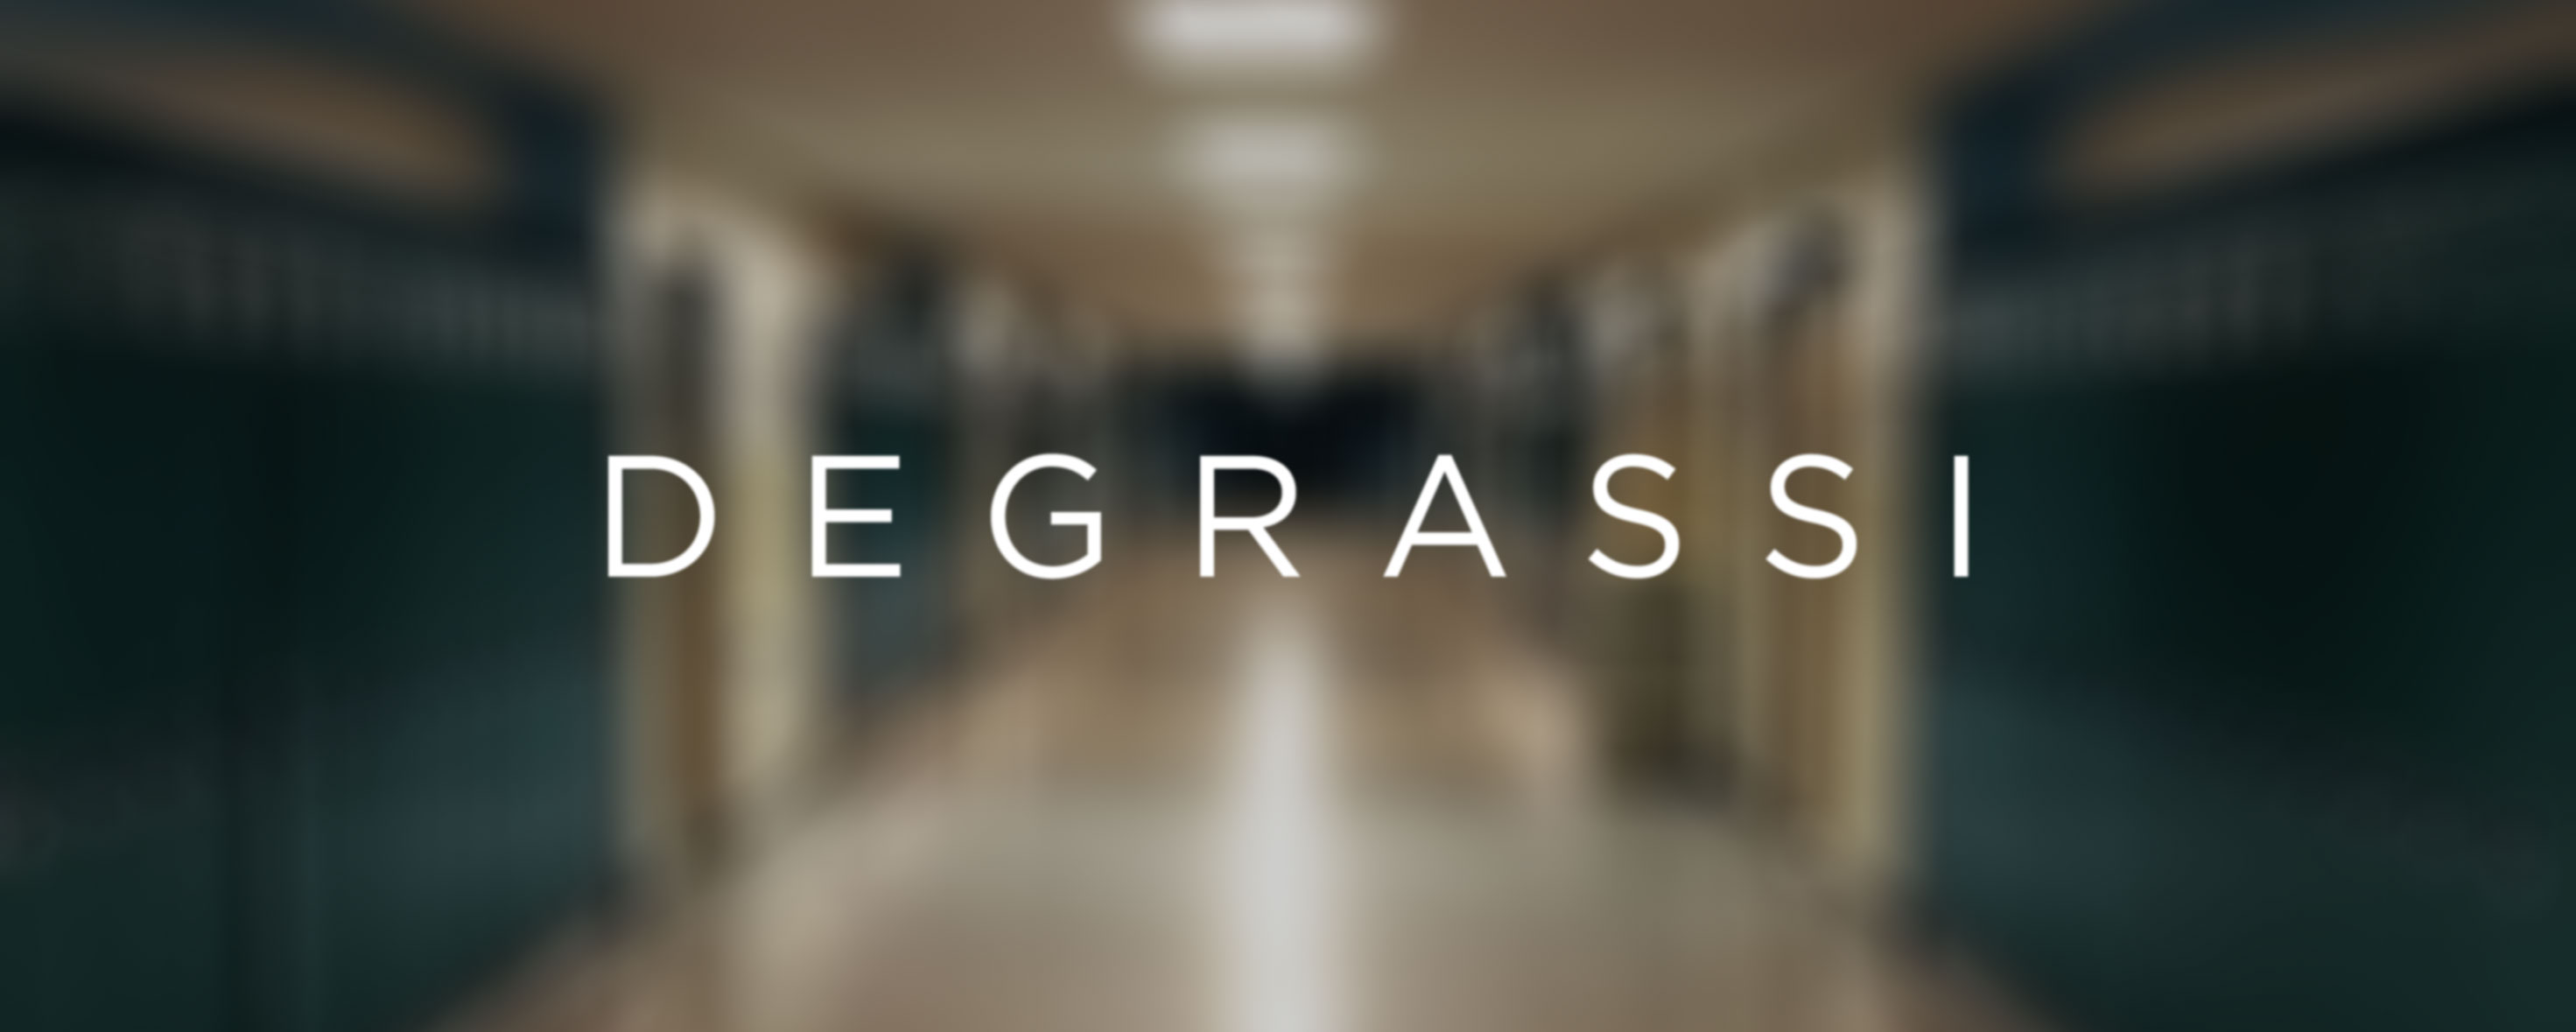 The word Degrassi over a blurry high school hallway with green lockers and brown classroom doors.